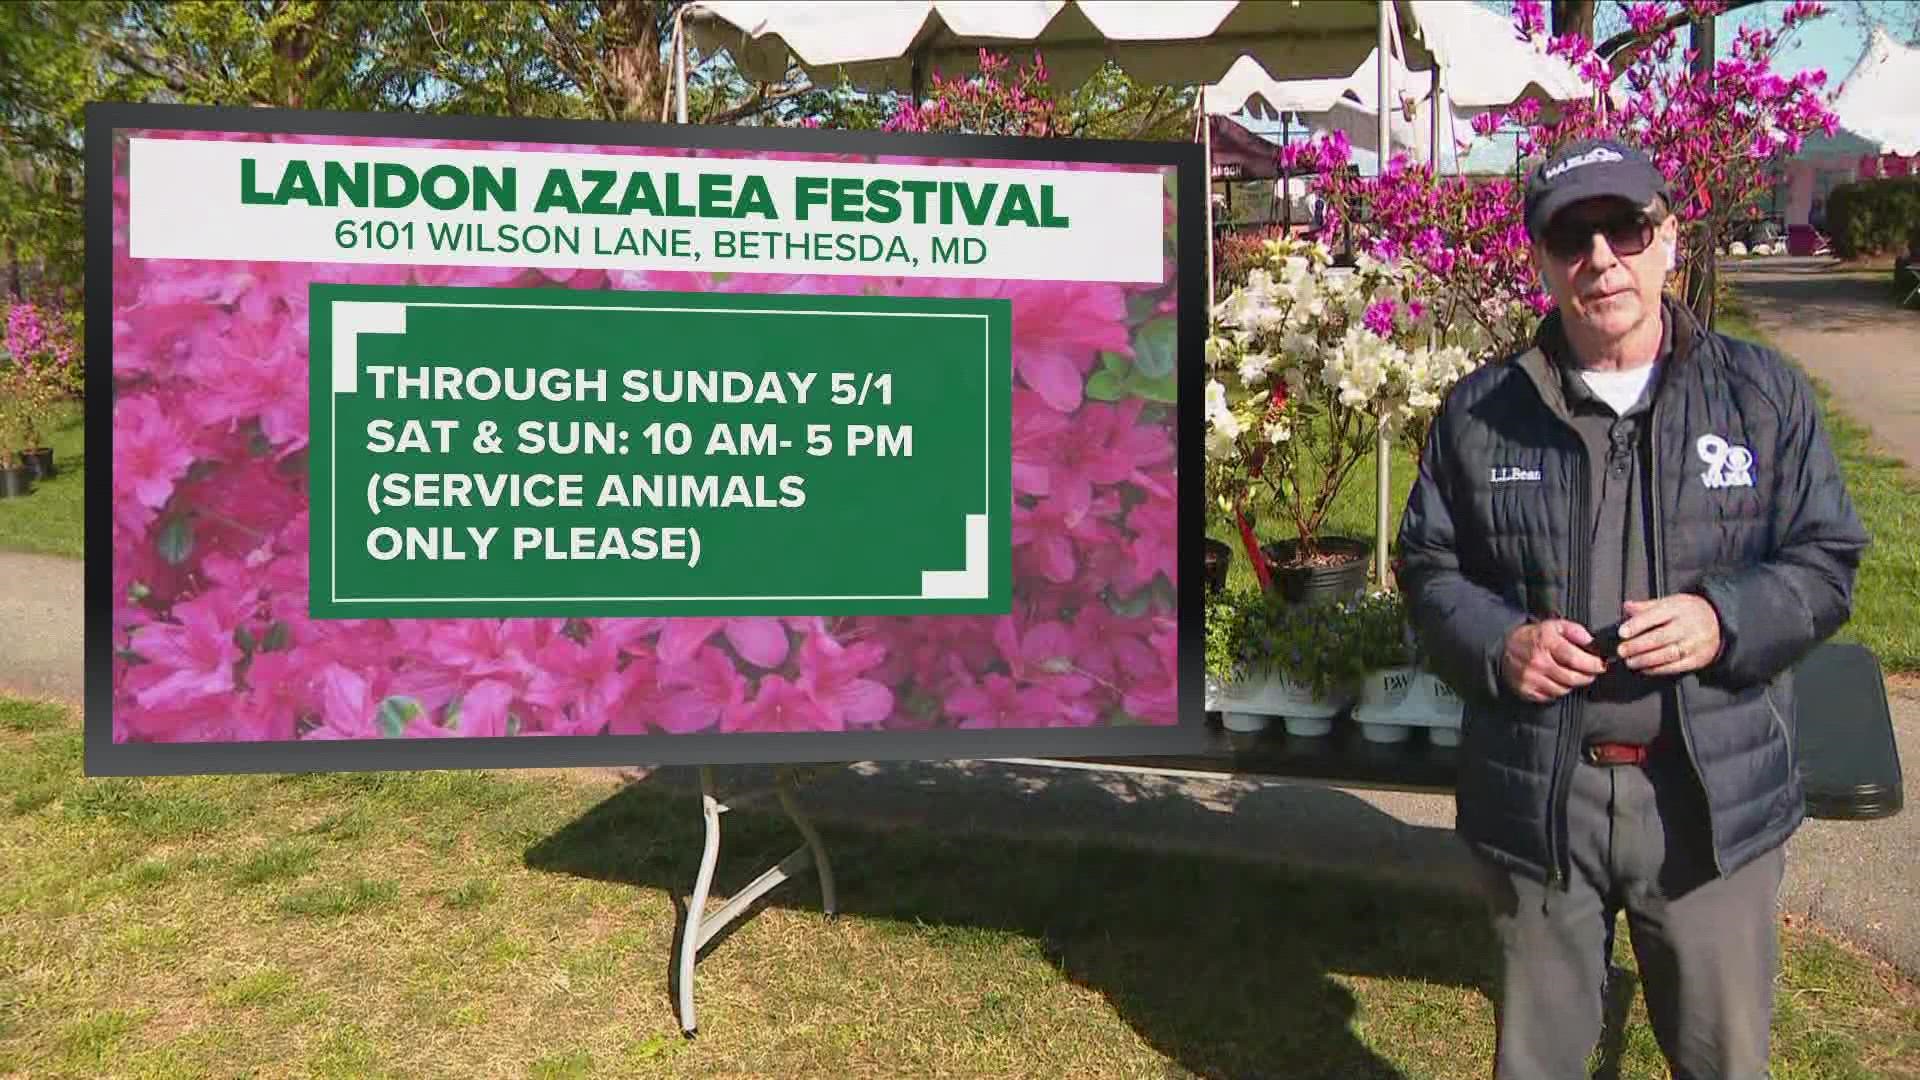 The Azalea Festival is free and open to the public and will include everything from flower and plant sales to food, sweets, rides and boutique shopping for visitors.